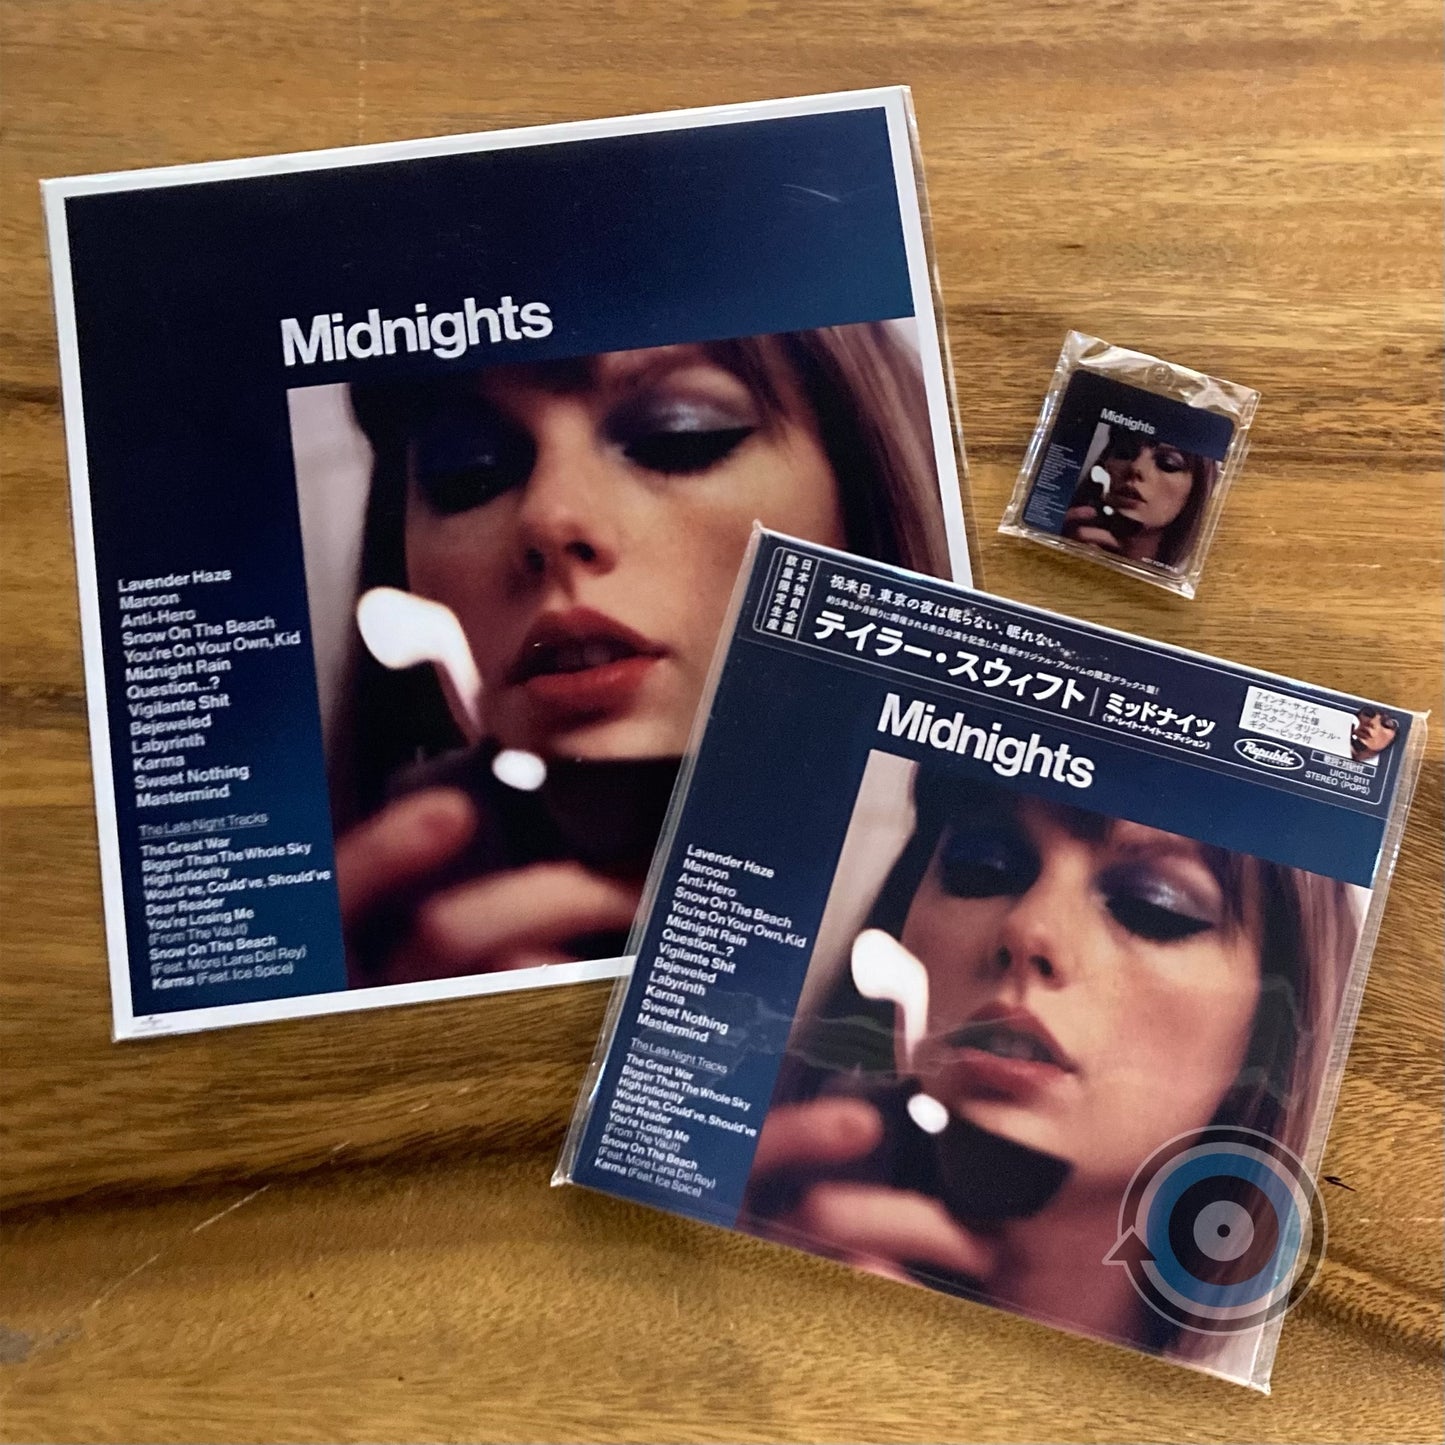 Taylor Swift – Midnights (The Late Night Edition) CD